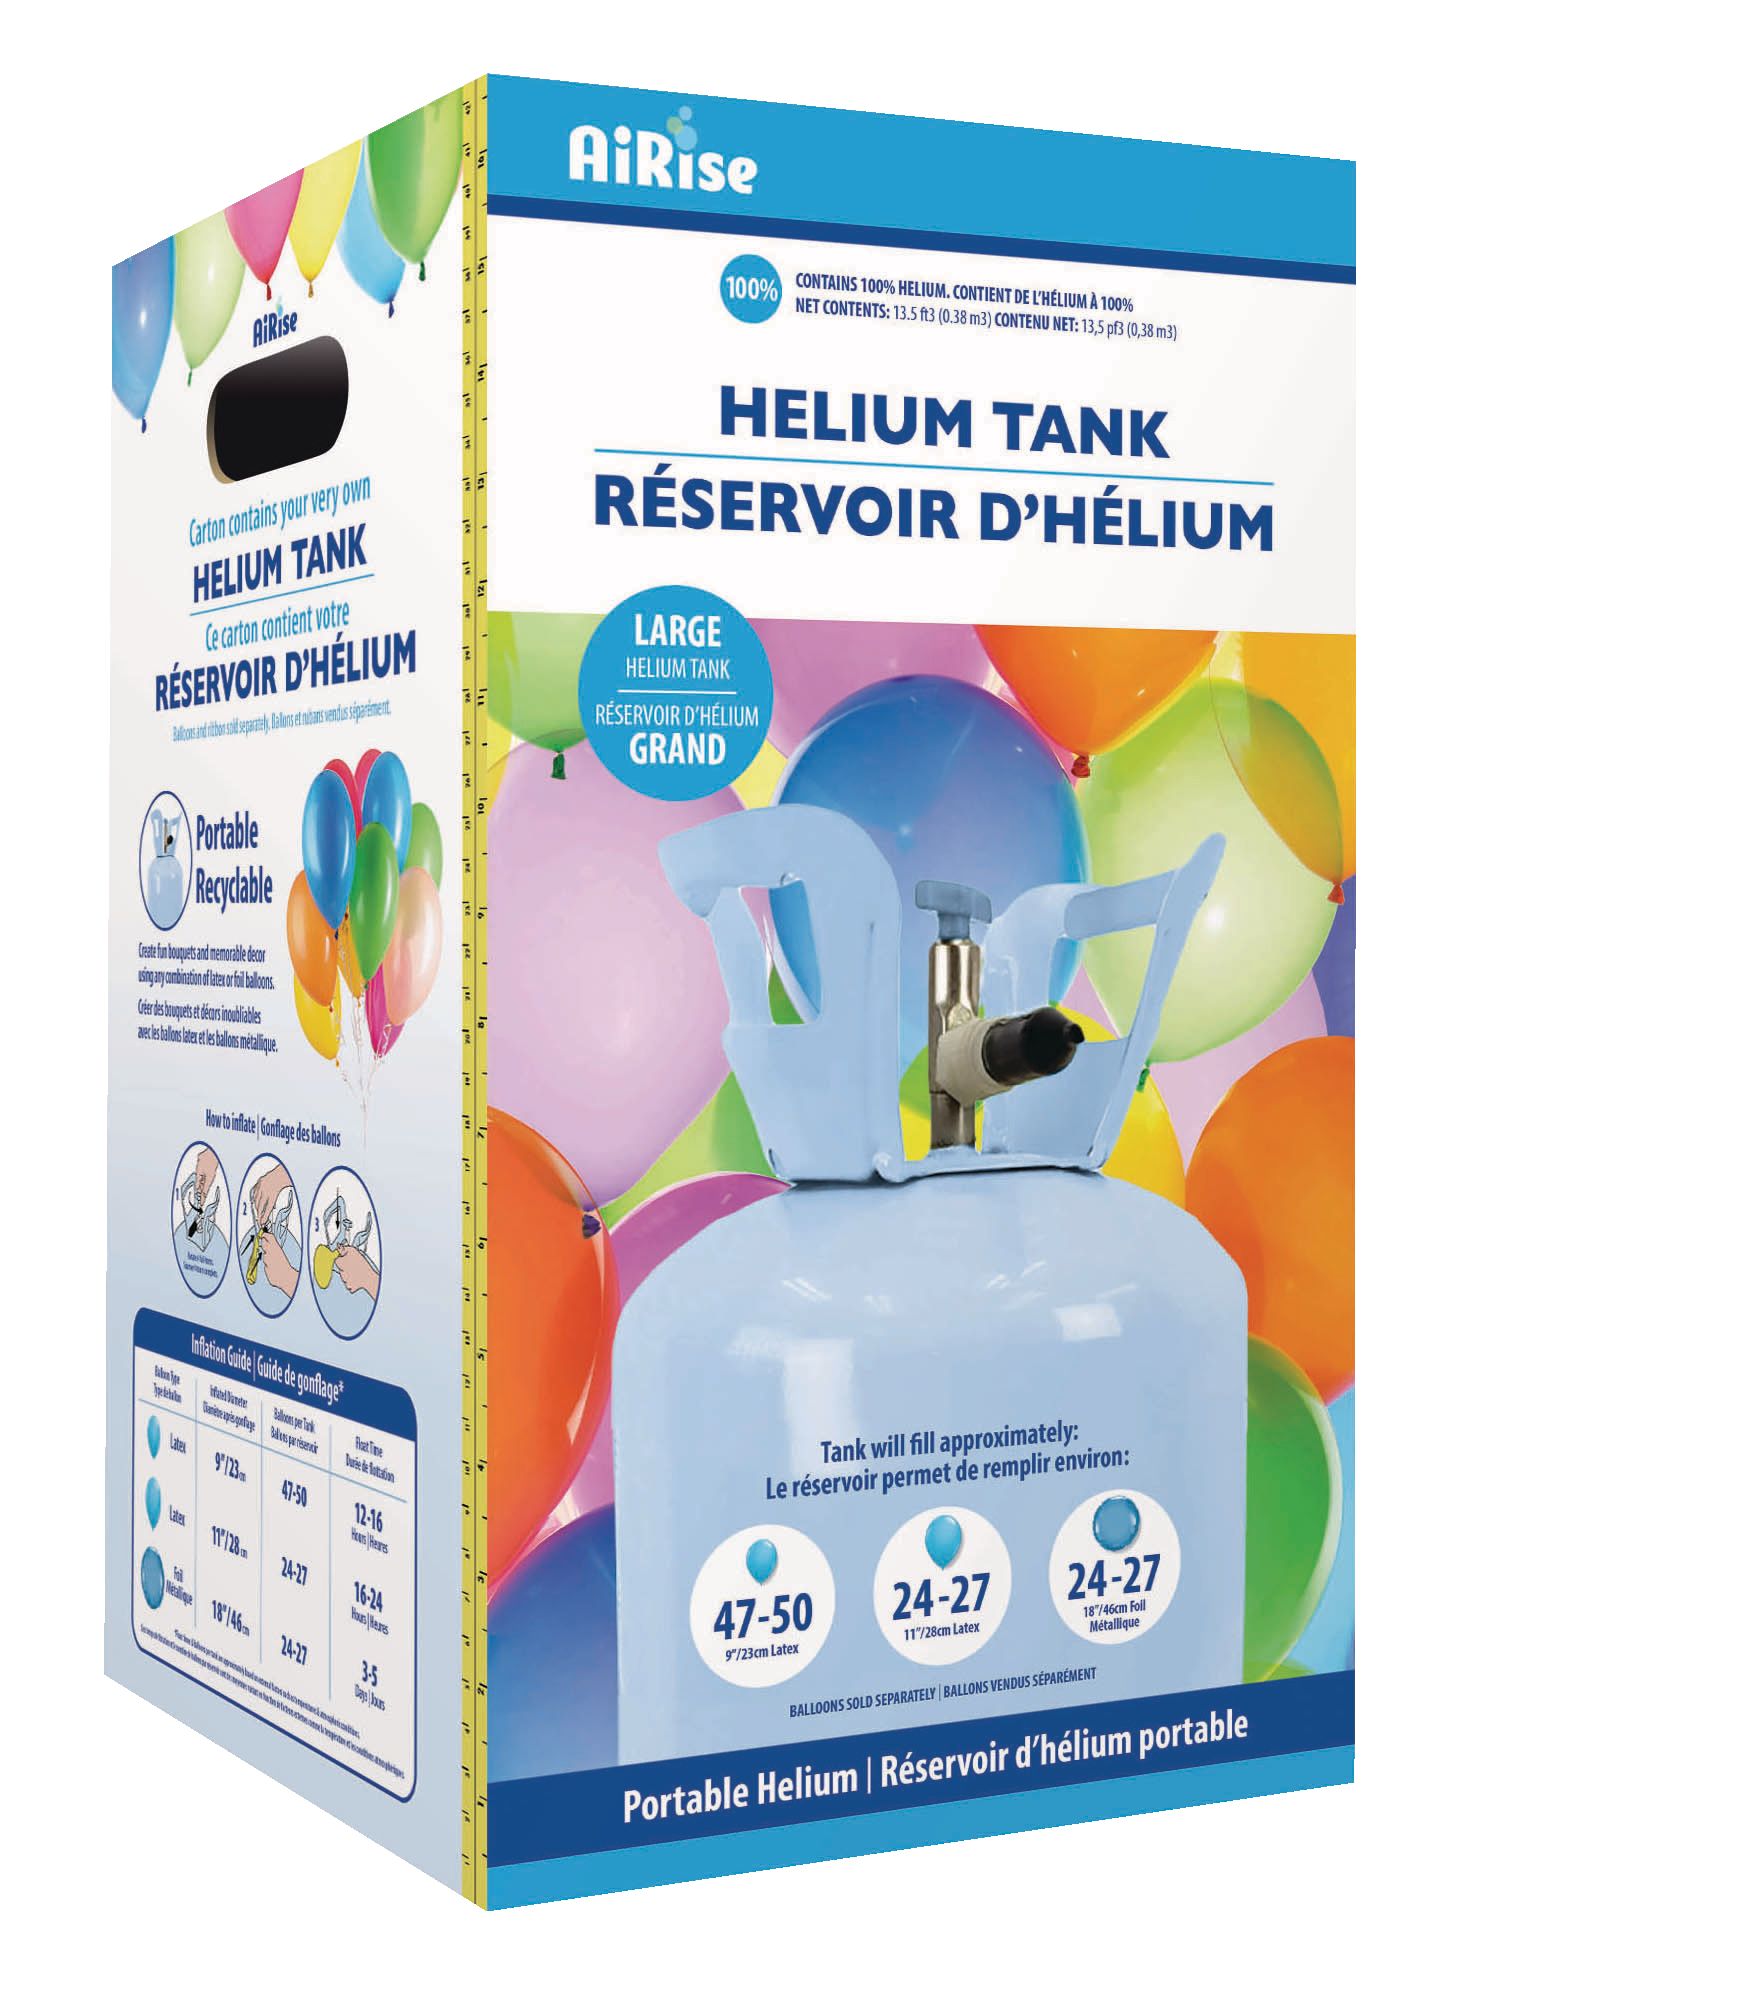 AiRise Large Portable Helium Tank, Blue, for Birthday/New Year's